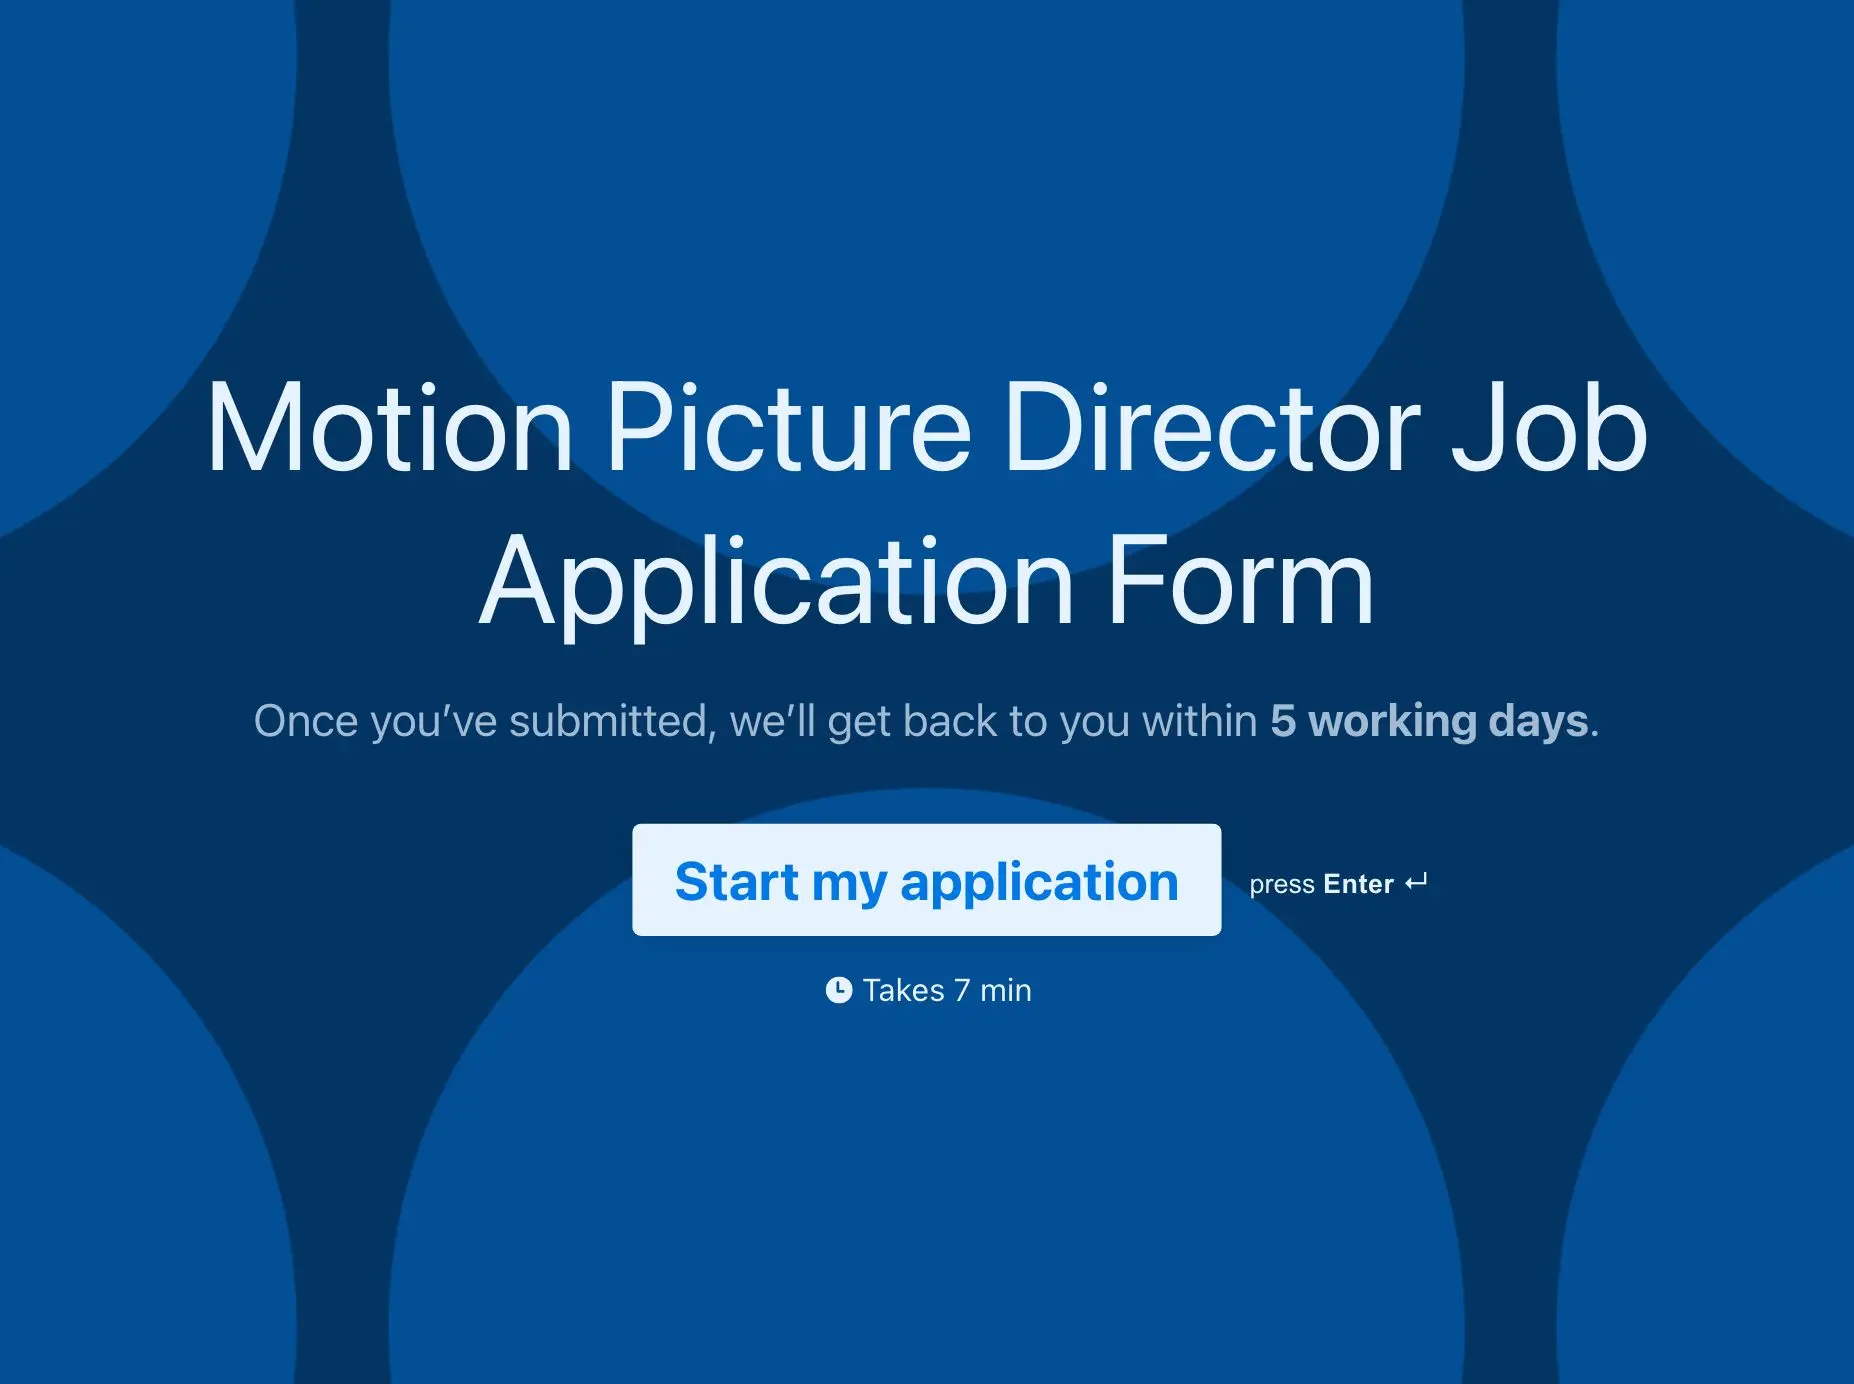 Motion Picture Director Job Application Form Template Hero